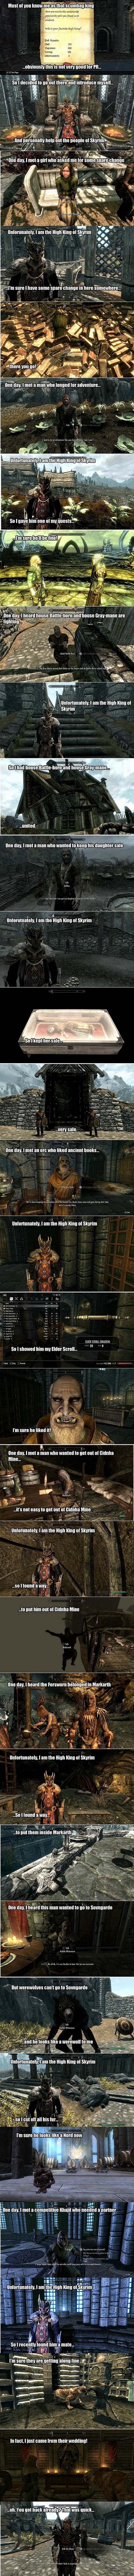 Nicest guy in all of Skyrim, may Talos bless you.